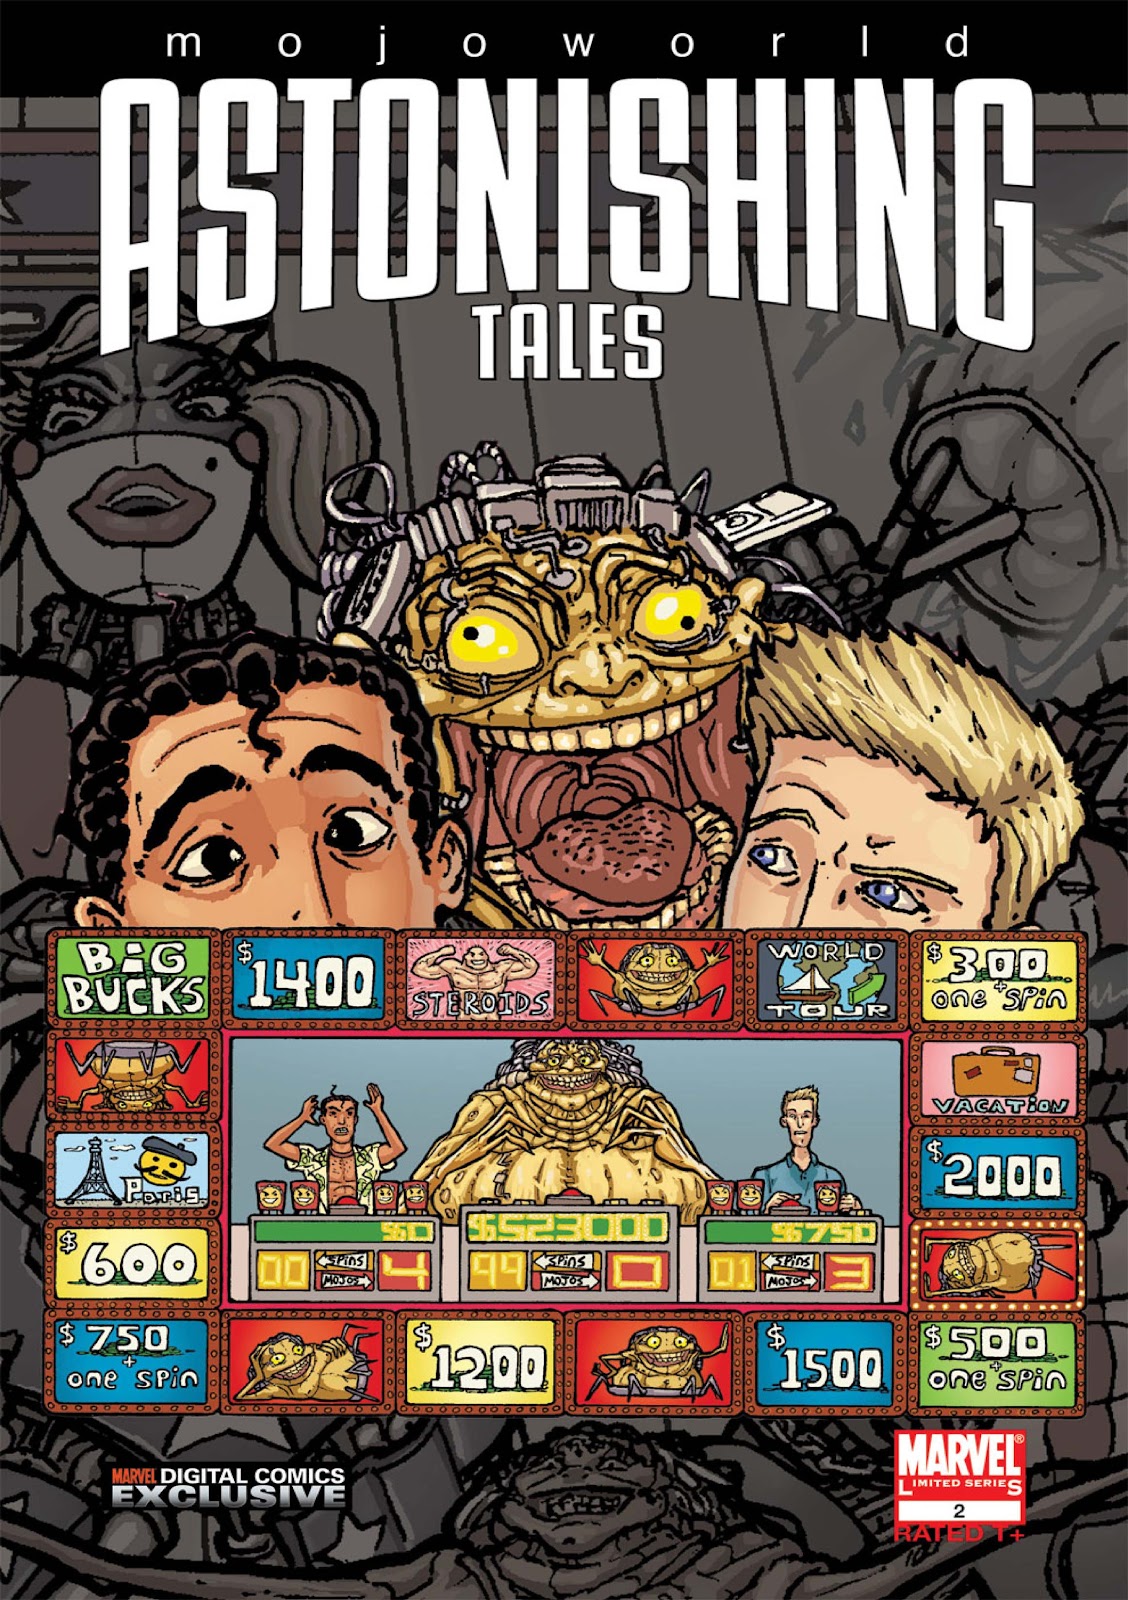 Astonishing Tales: Mojoworld issue 2 - Page 1